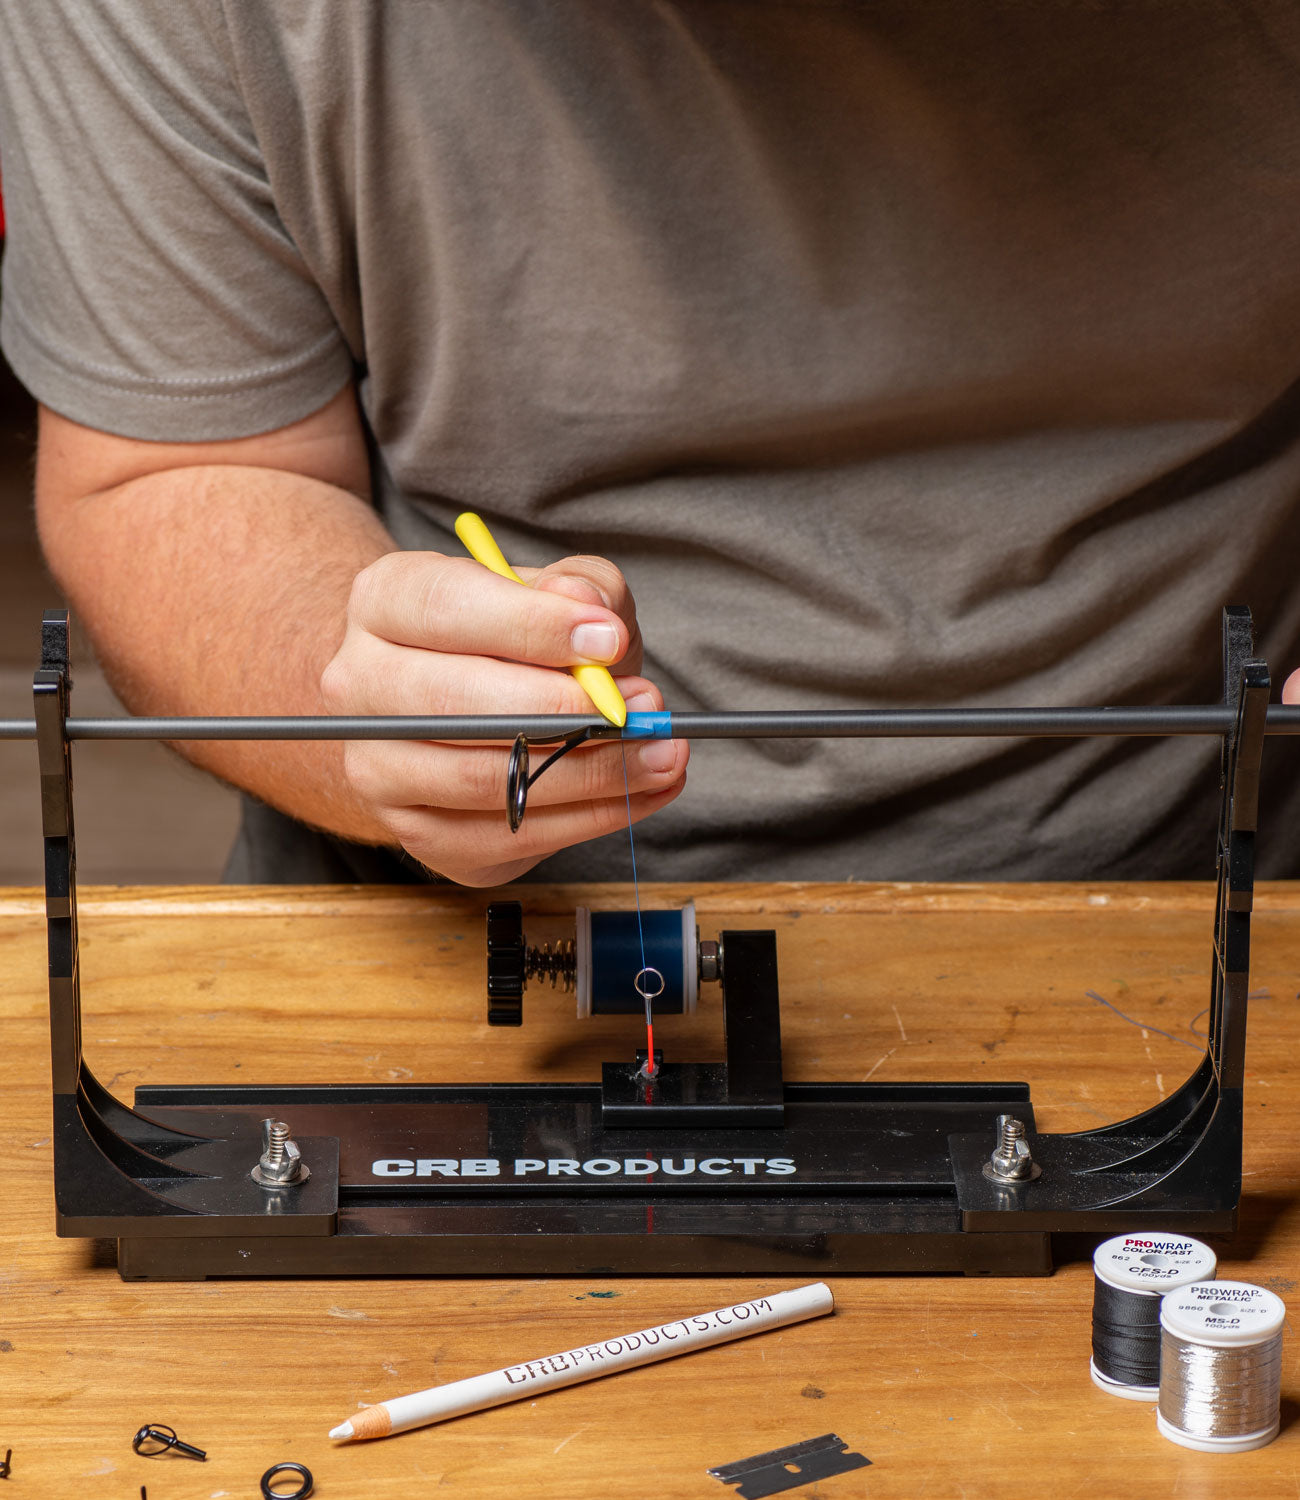 All-In-One Rod Building Kits